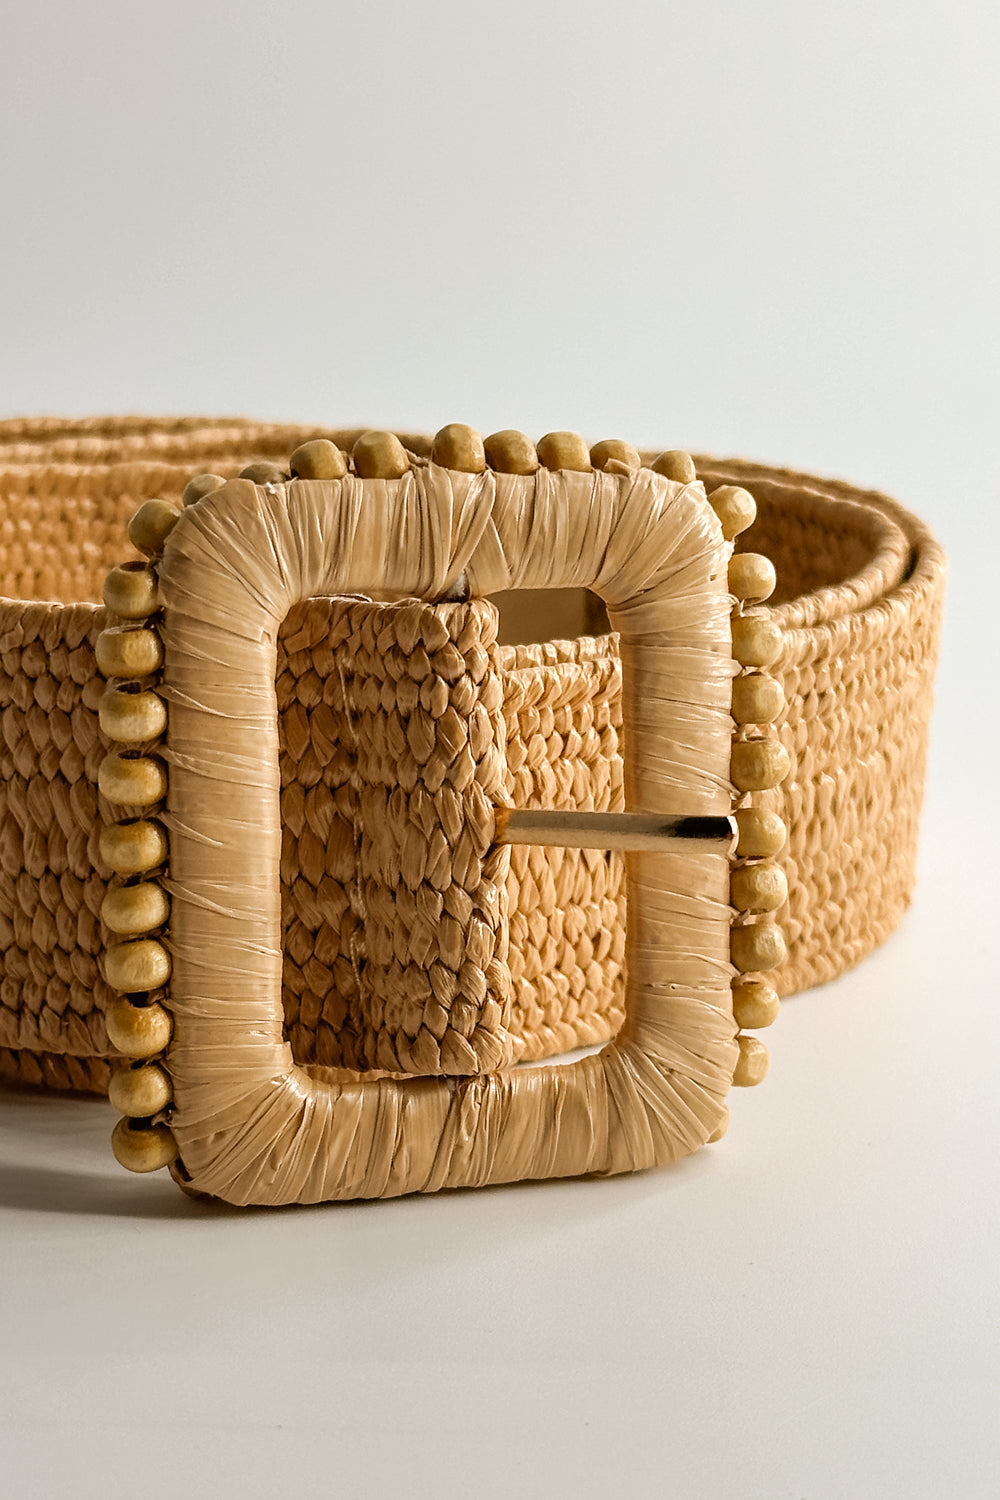 Close up view of the Lyla Tan Rattan Beaded Belt which features Tan Woven Fabric and Tan Rattan Adjustable Buckle with Wooden Bead Details